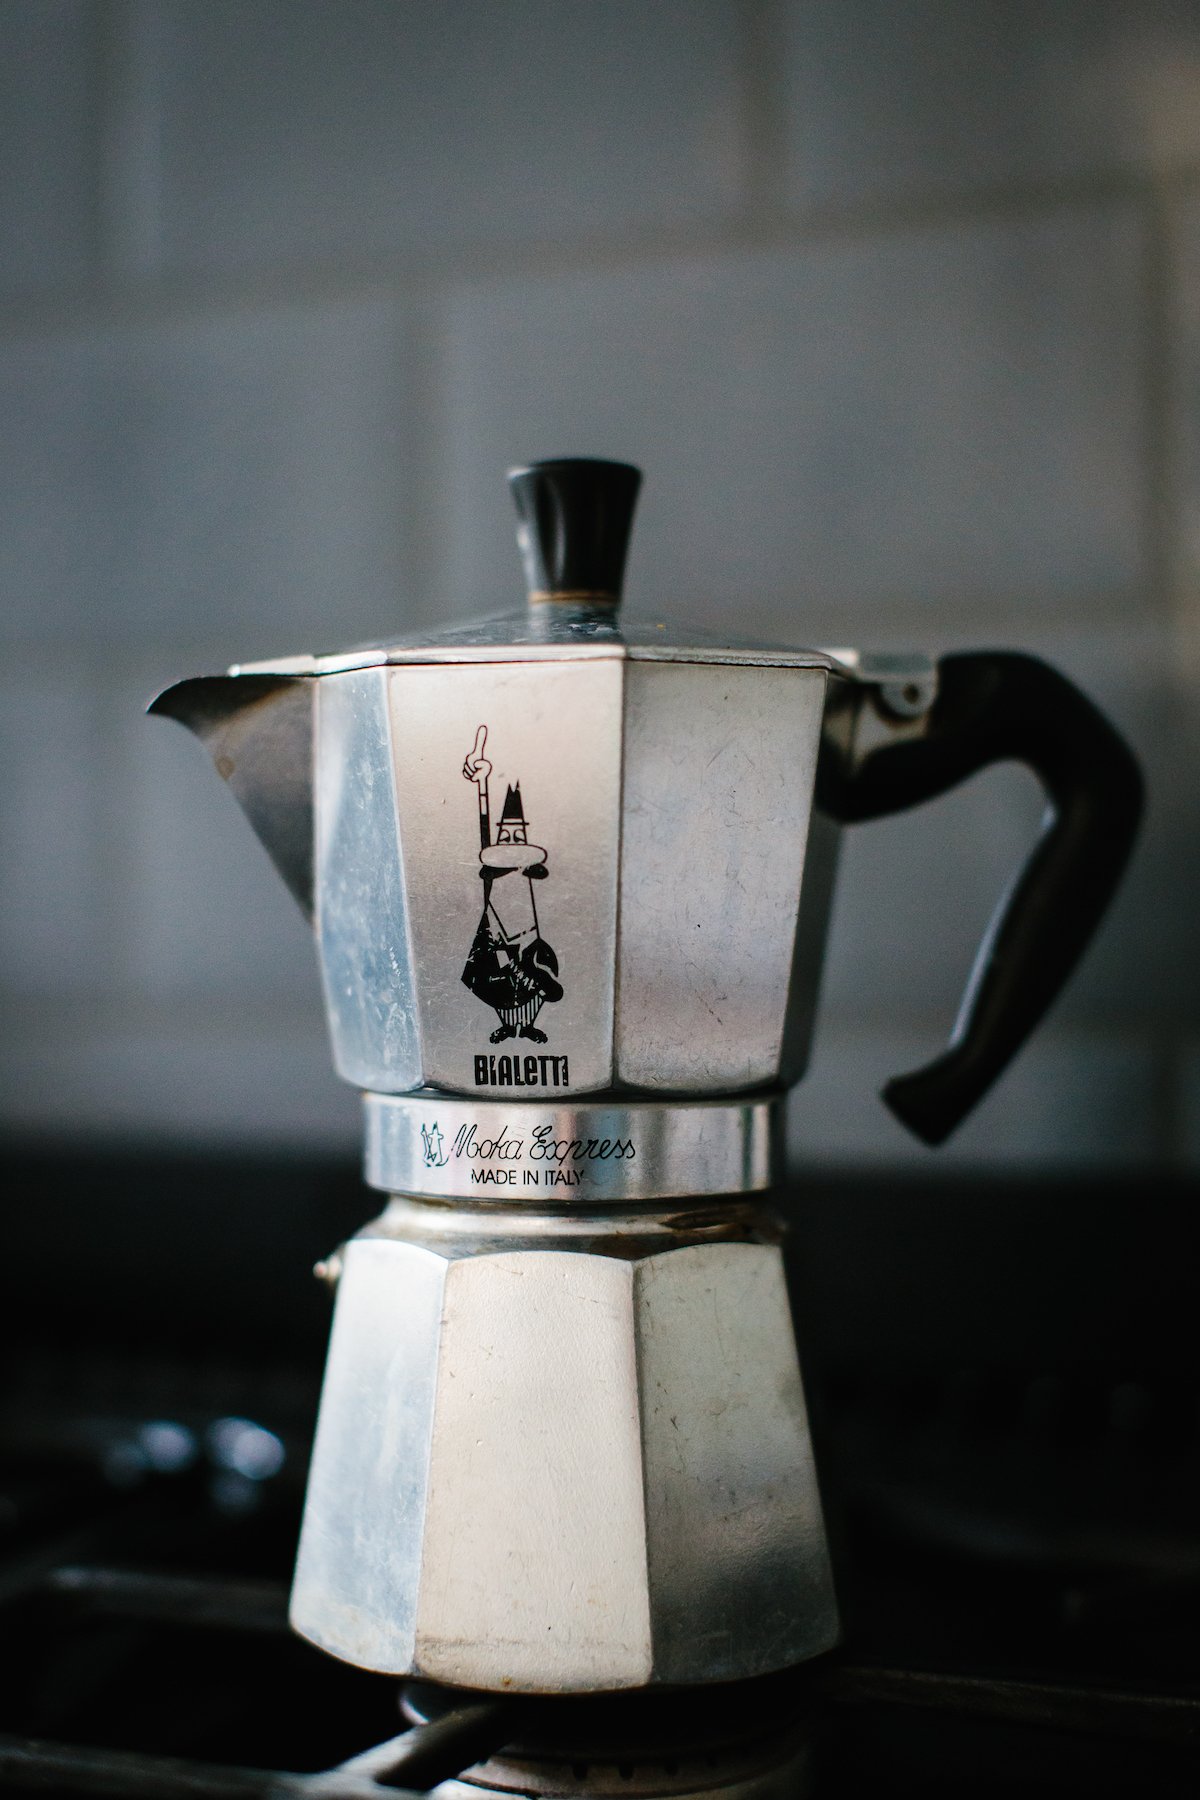 Wake up every day with the sound of the Moka: the most beautiful